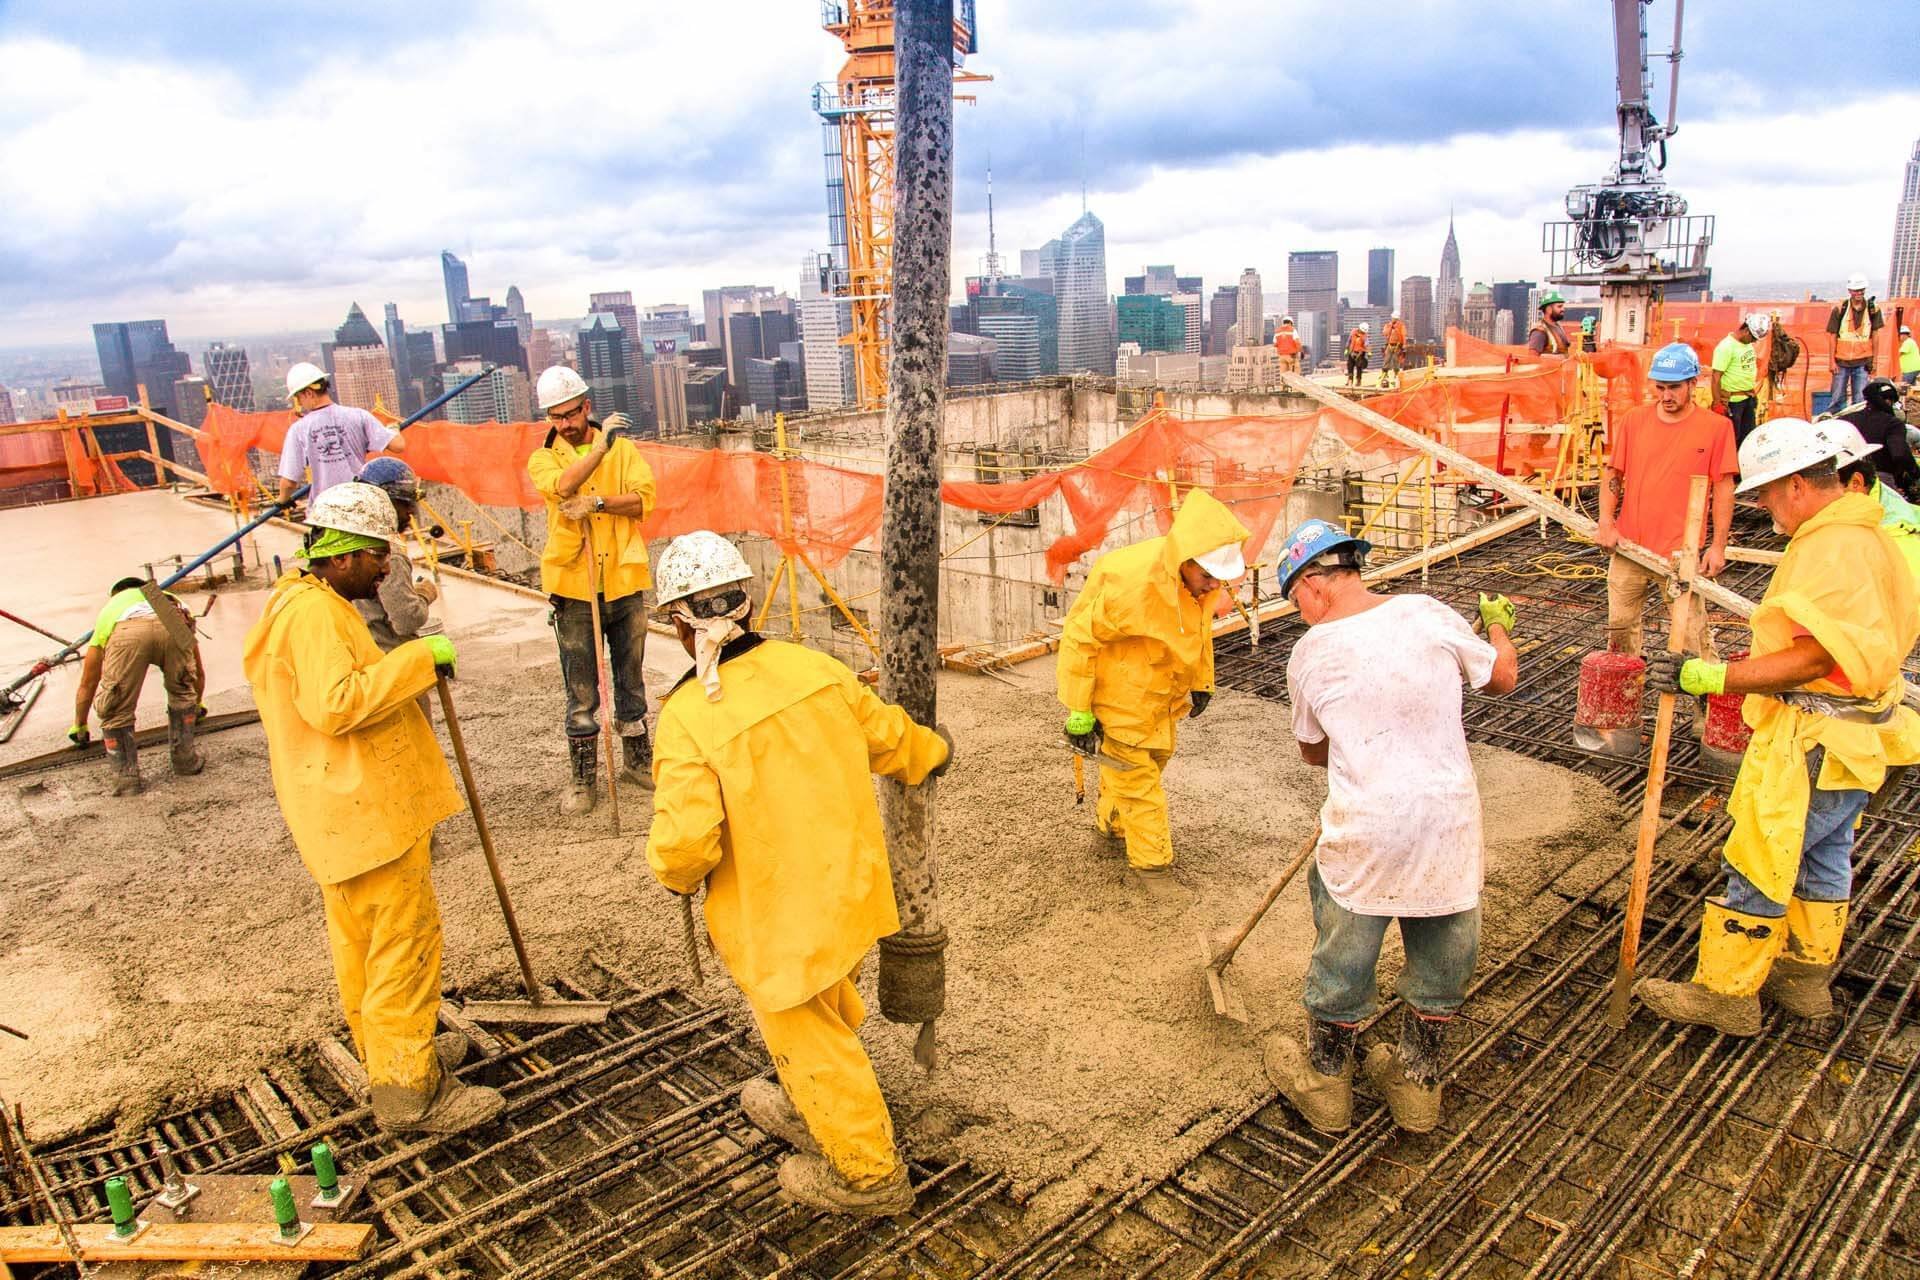 Hudson Yards Topping Out Concrete Pour 04 - courtesy of Joe Woolhead